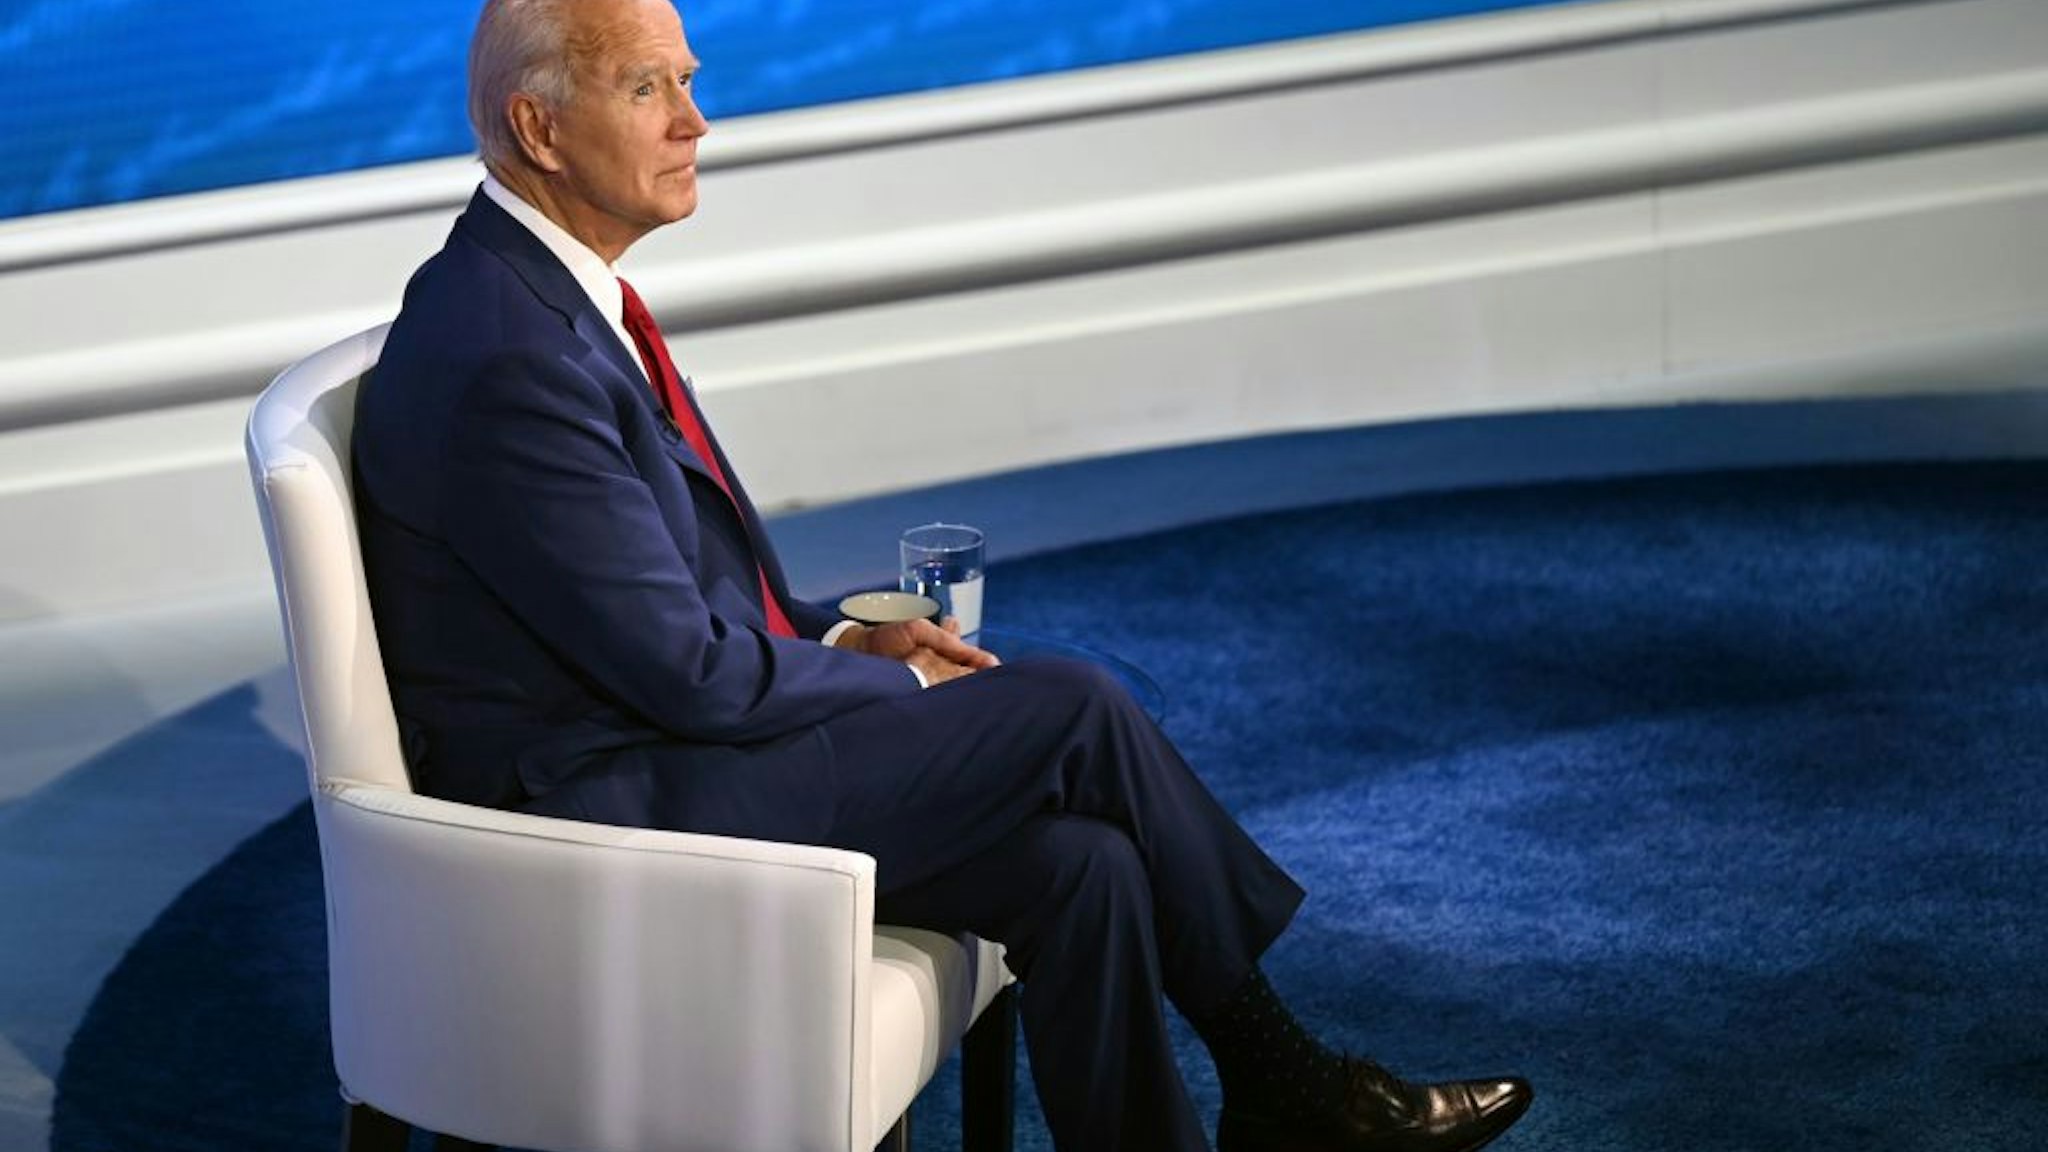 Democratic Presidential candidate and former US Vice President Joe Biden participates in an ABC News town hall event at the National Constitution Center in Philadelphia on October 15, 2020.